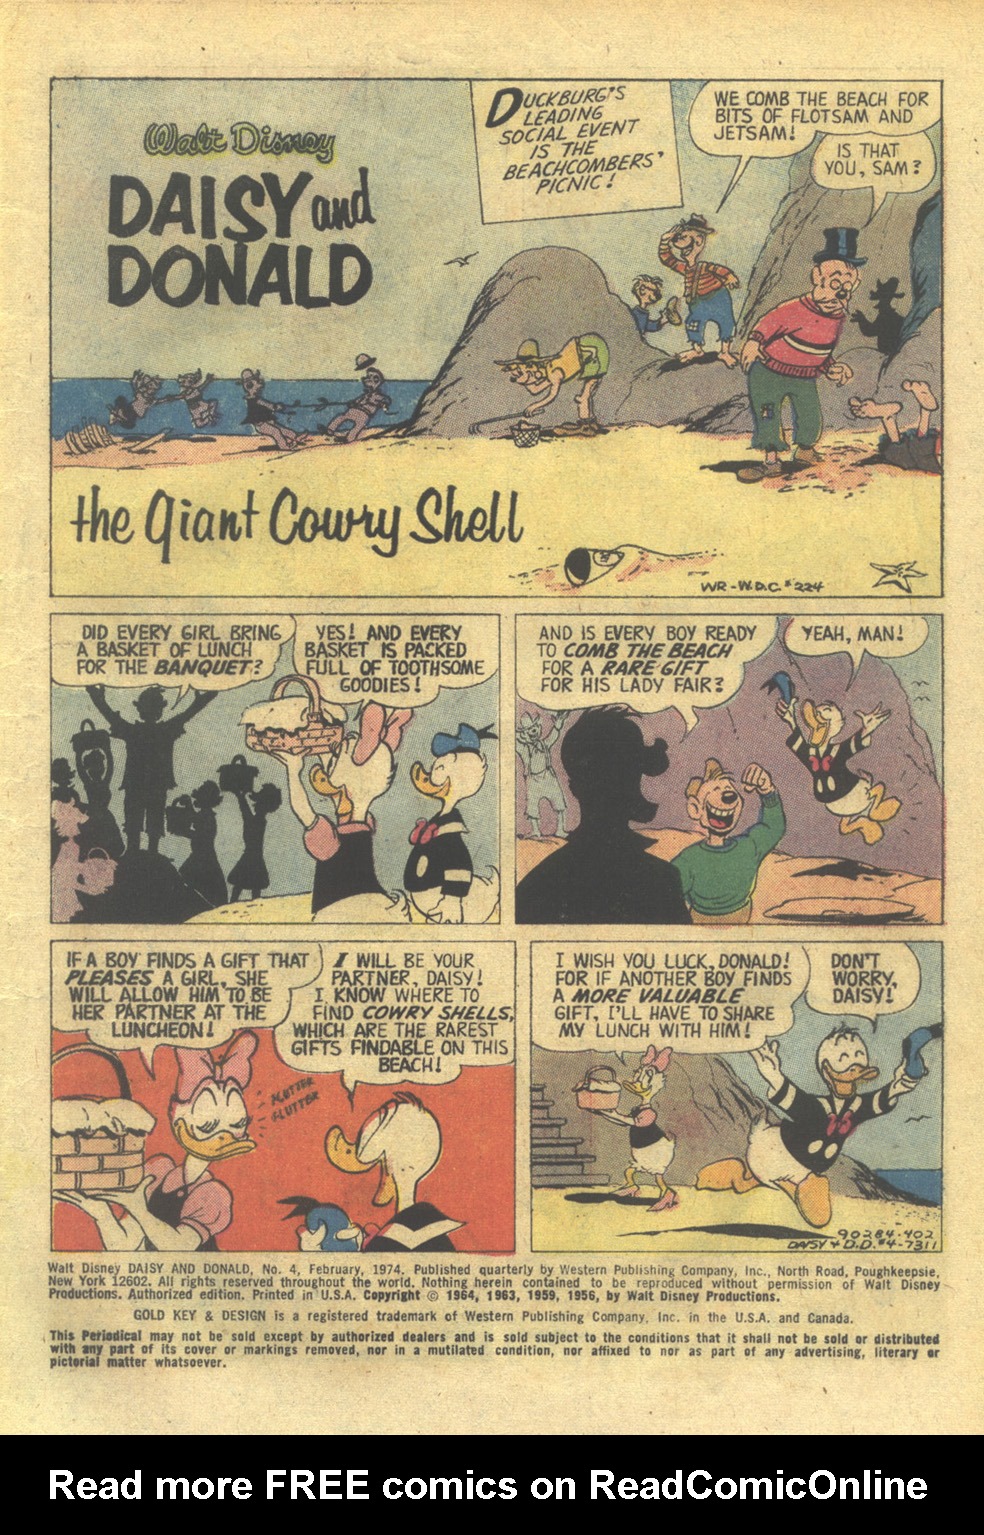 Read online Walt Disney Daisy and Donald comic -  Issue #4 - 3